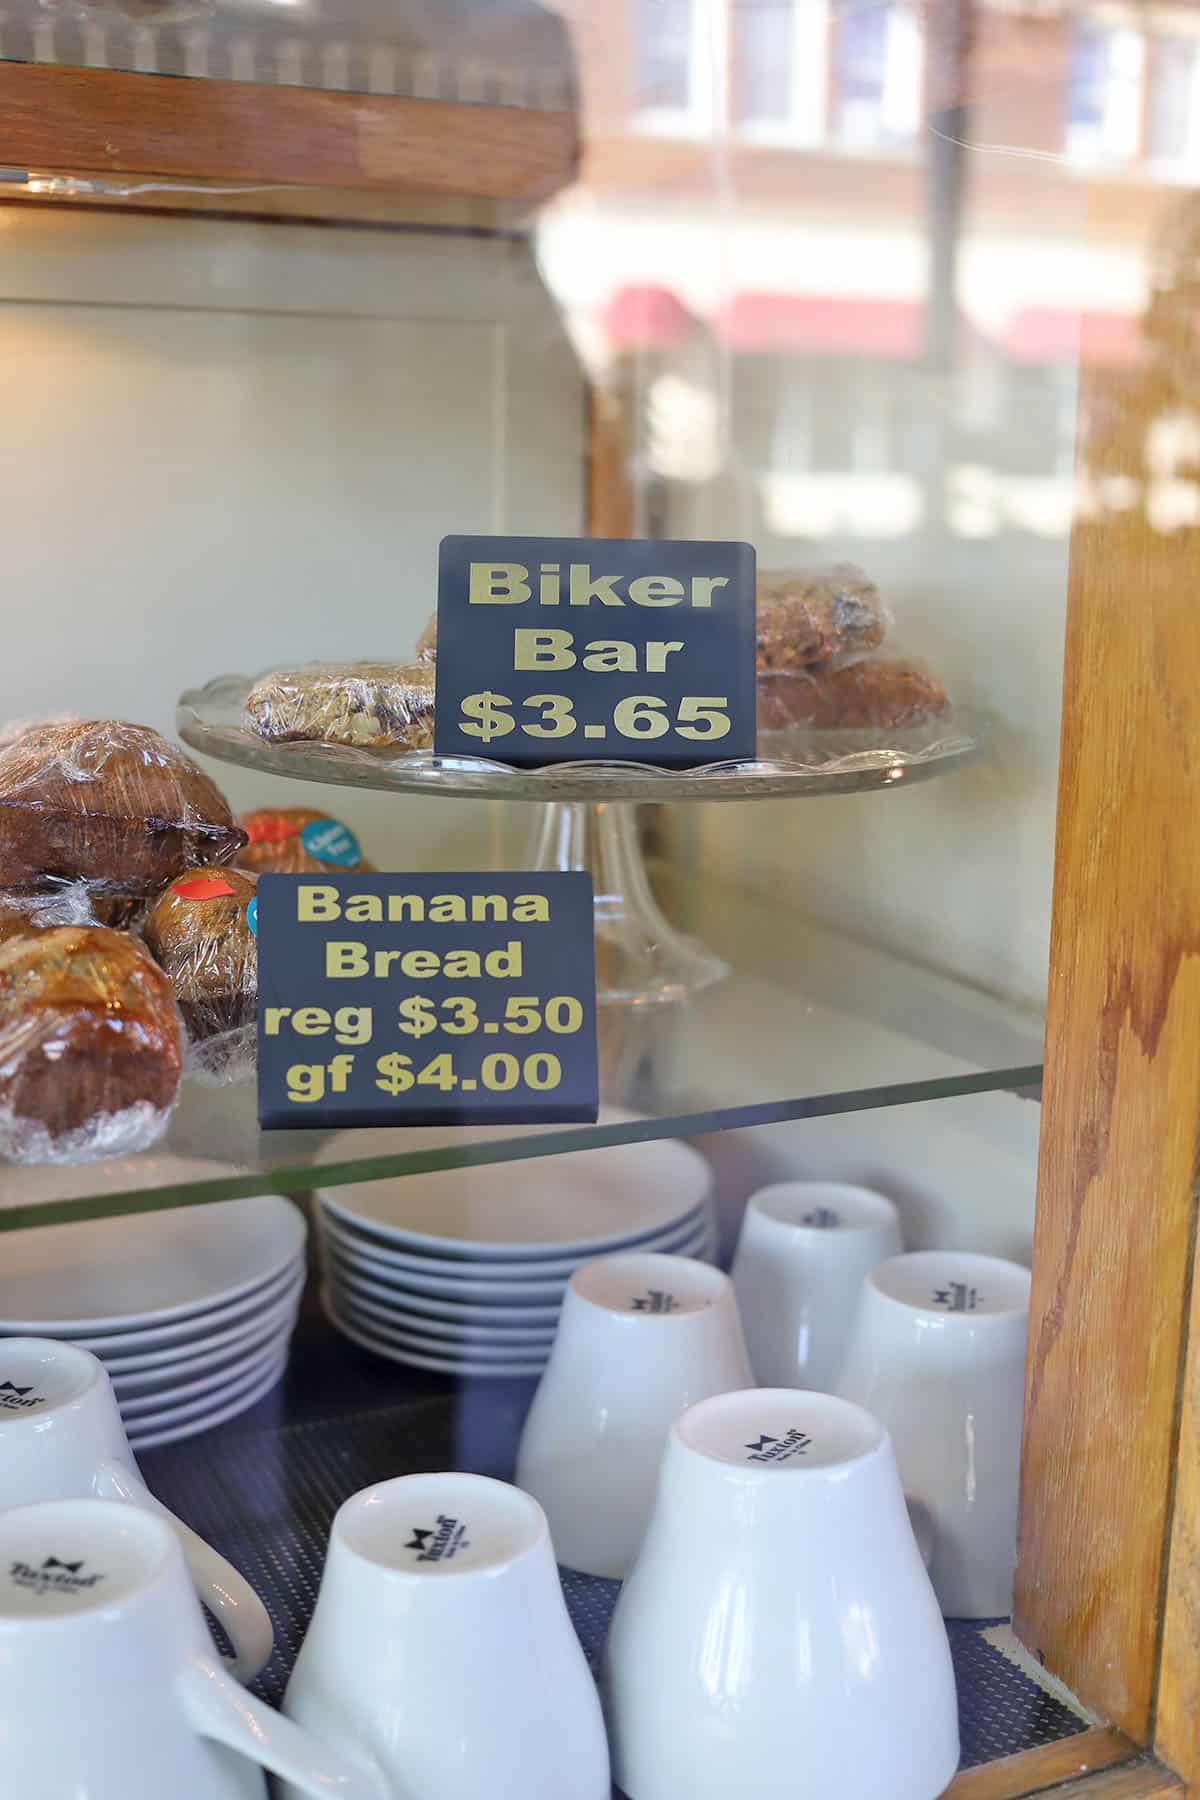 Pastry case with biker bars and banana bread.